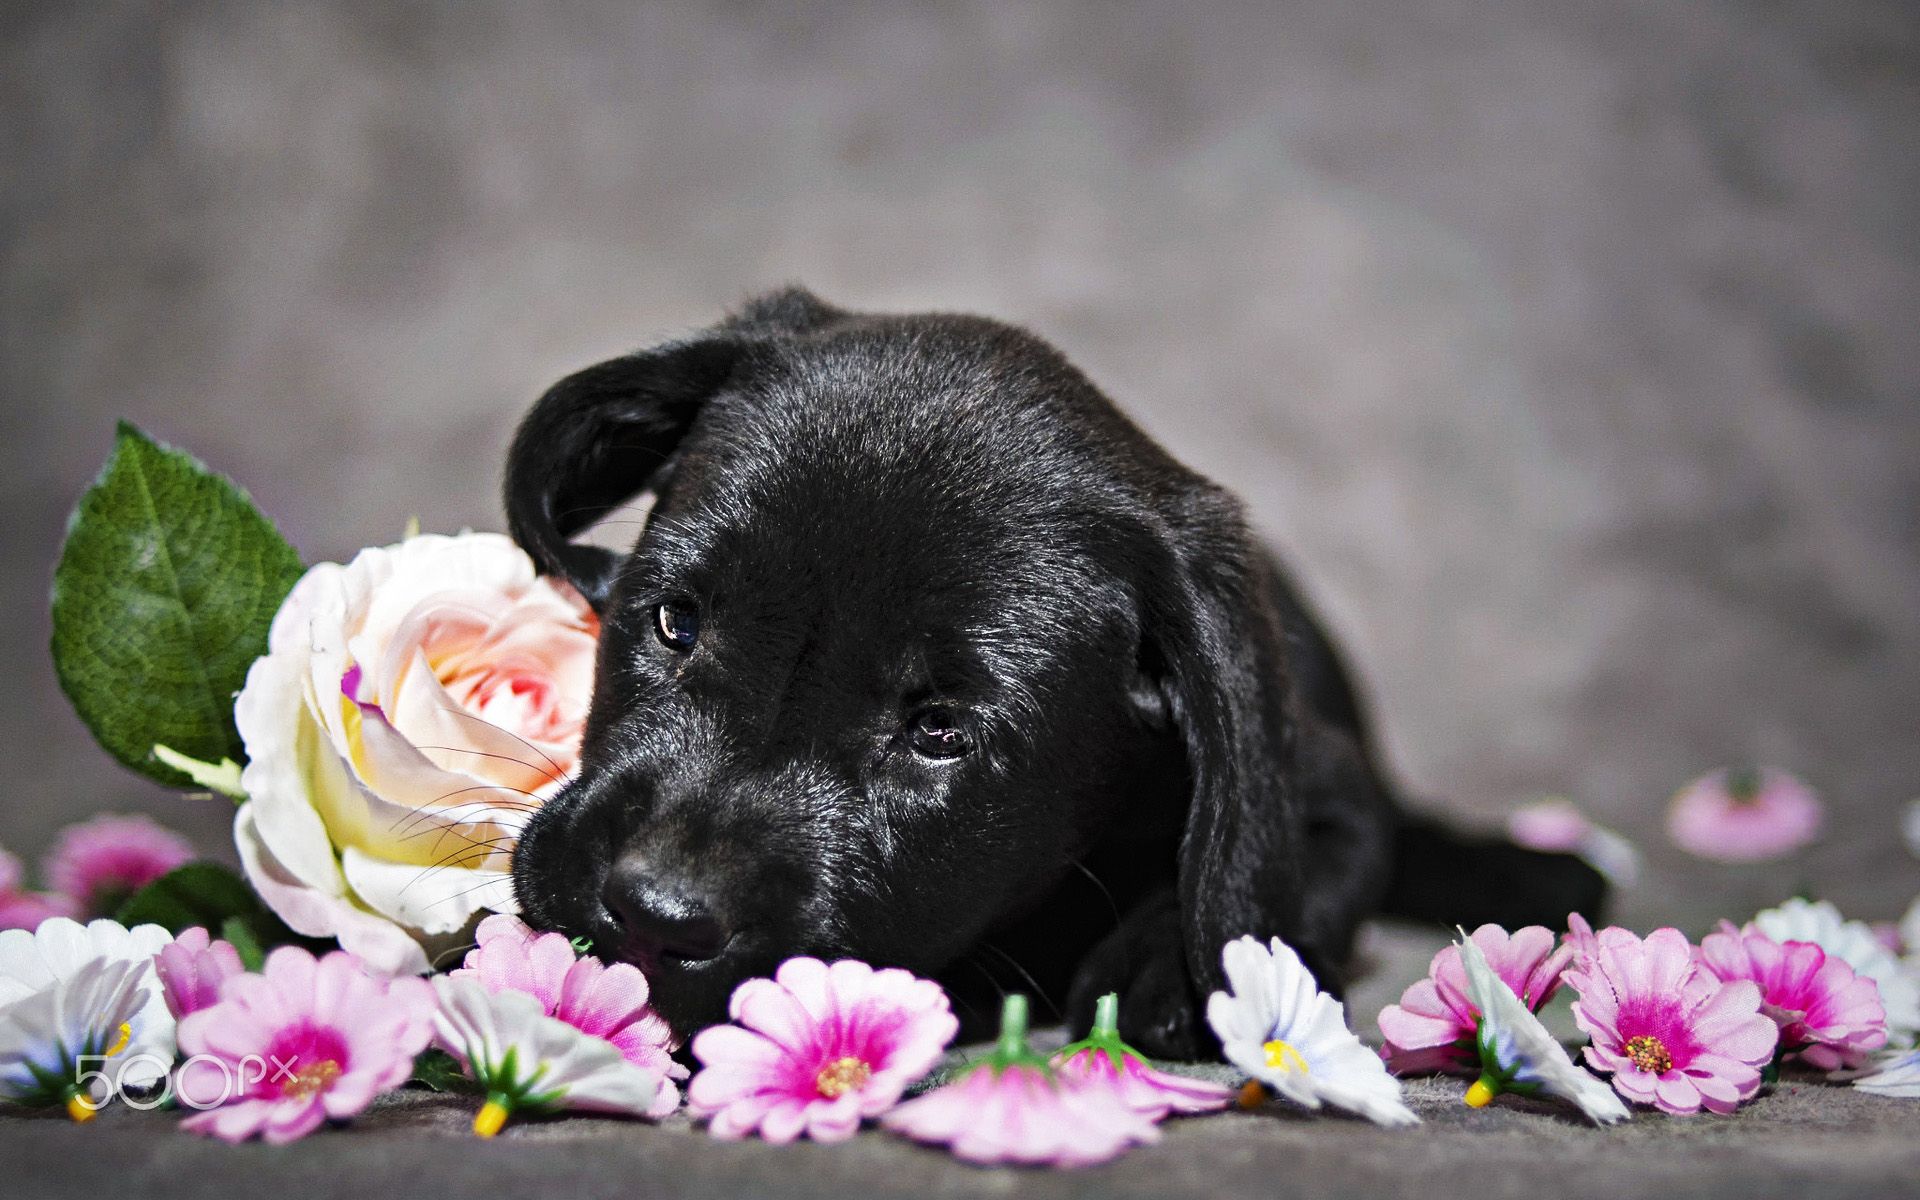 Download Wallpaper Black Labrador, Puppy With Flowers, Close Up, Retriever, Pets, Black Dog, Cute Animals, Black Retriever, Labradors, Puppy For Desktop With Resolution 1920x1200. High Quality HD Picture Wallpaper